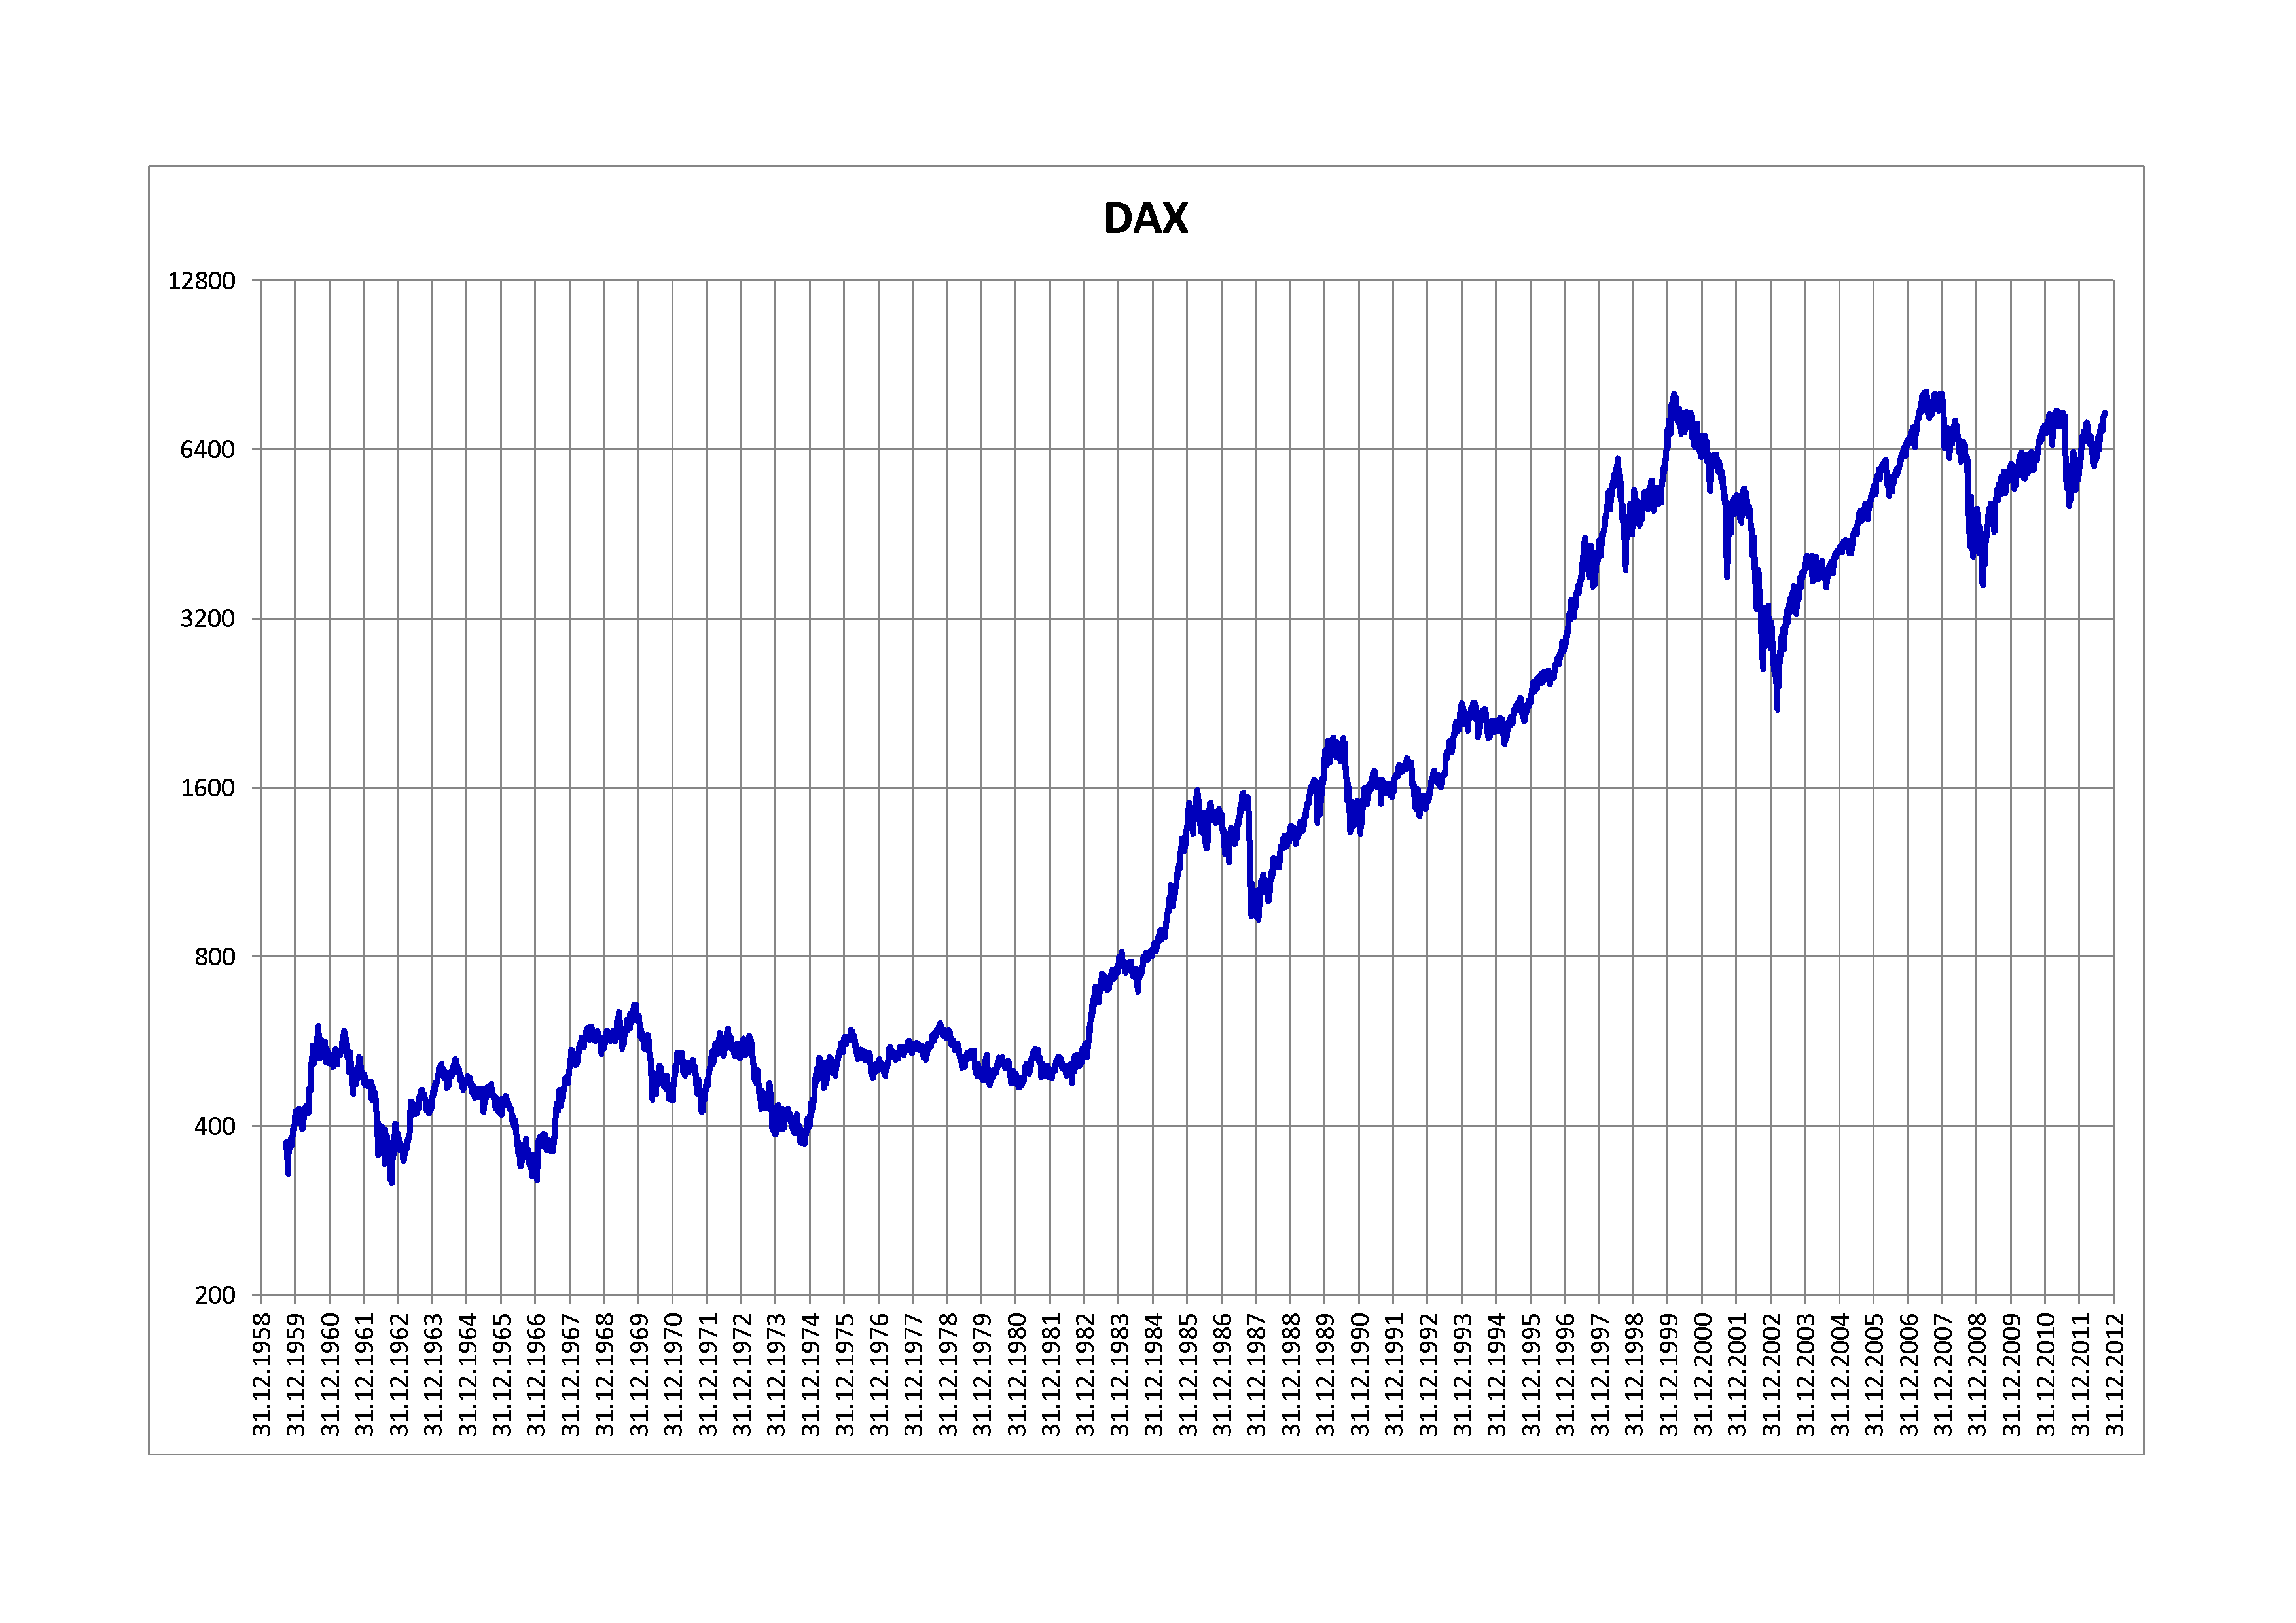 DAX Index Returns By Year From 1955 To 2012 | Seeking Alpha